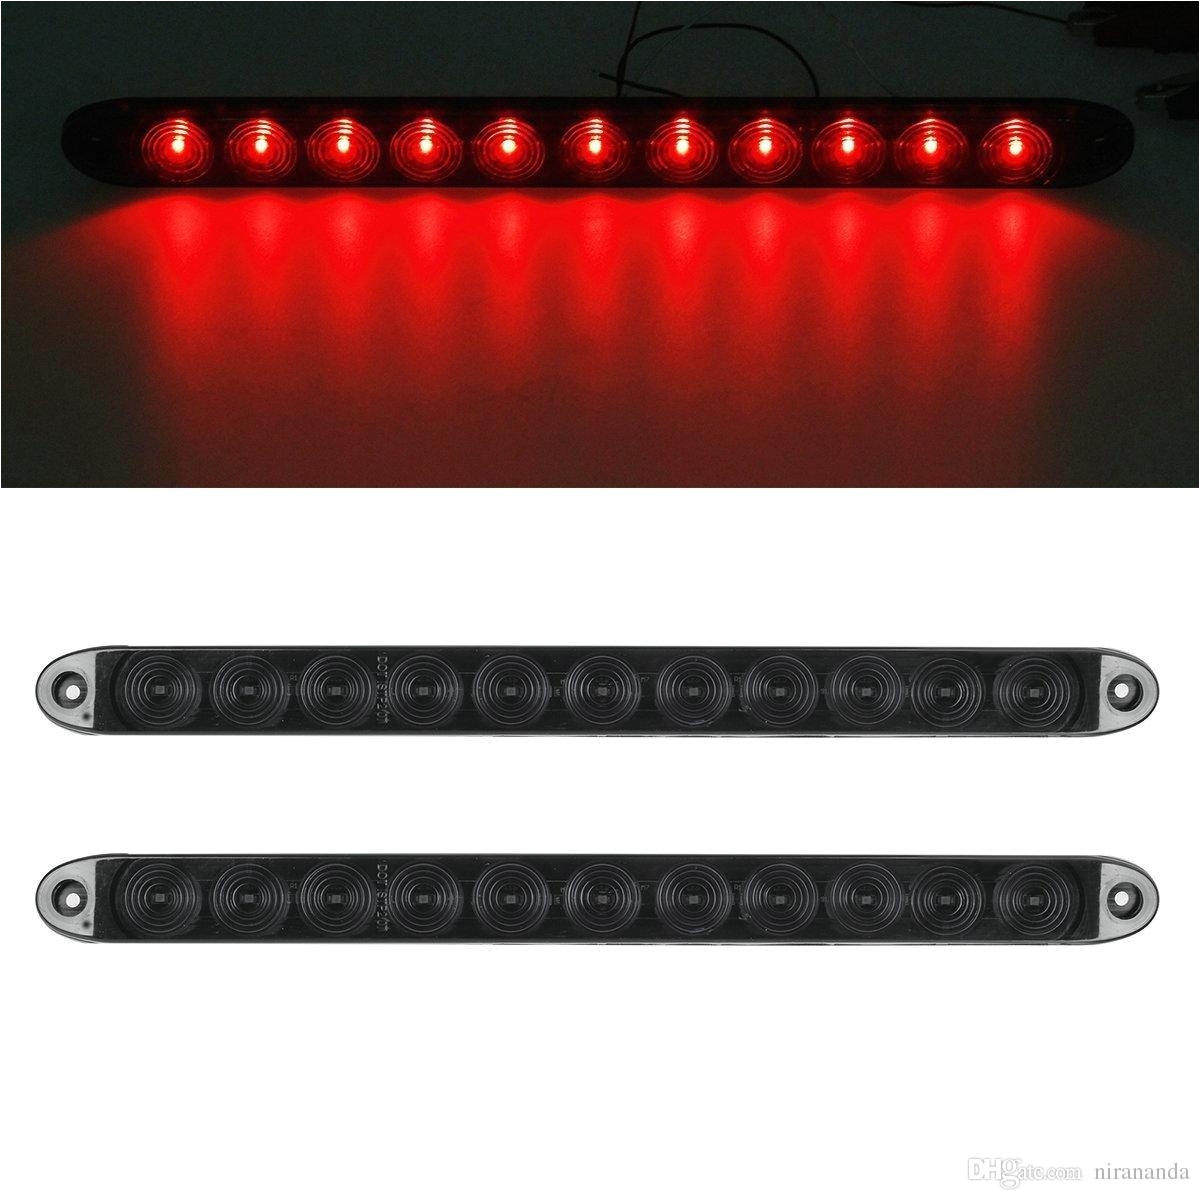 discount 15 smoke red 11 led waterproof car trailer truck stop turn tail brake light bar identification light from china dhgate com